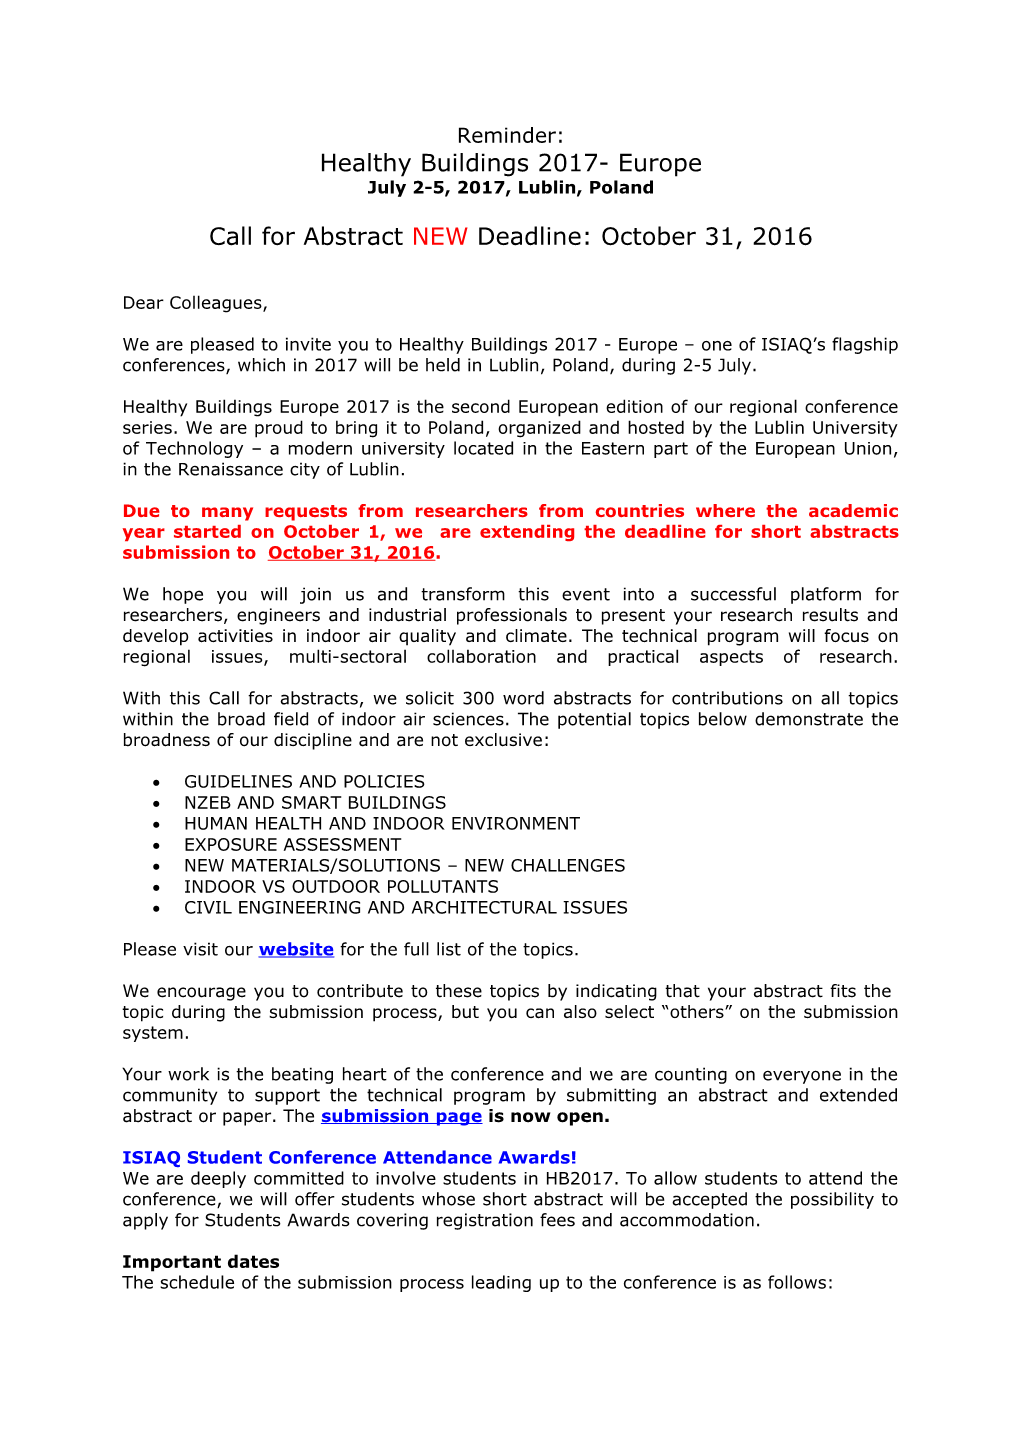 Call for Abstract Newdeadline: October 31, 2016